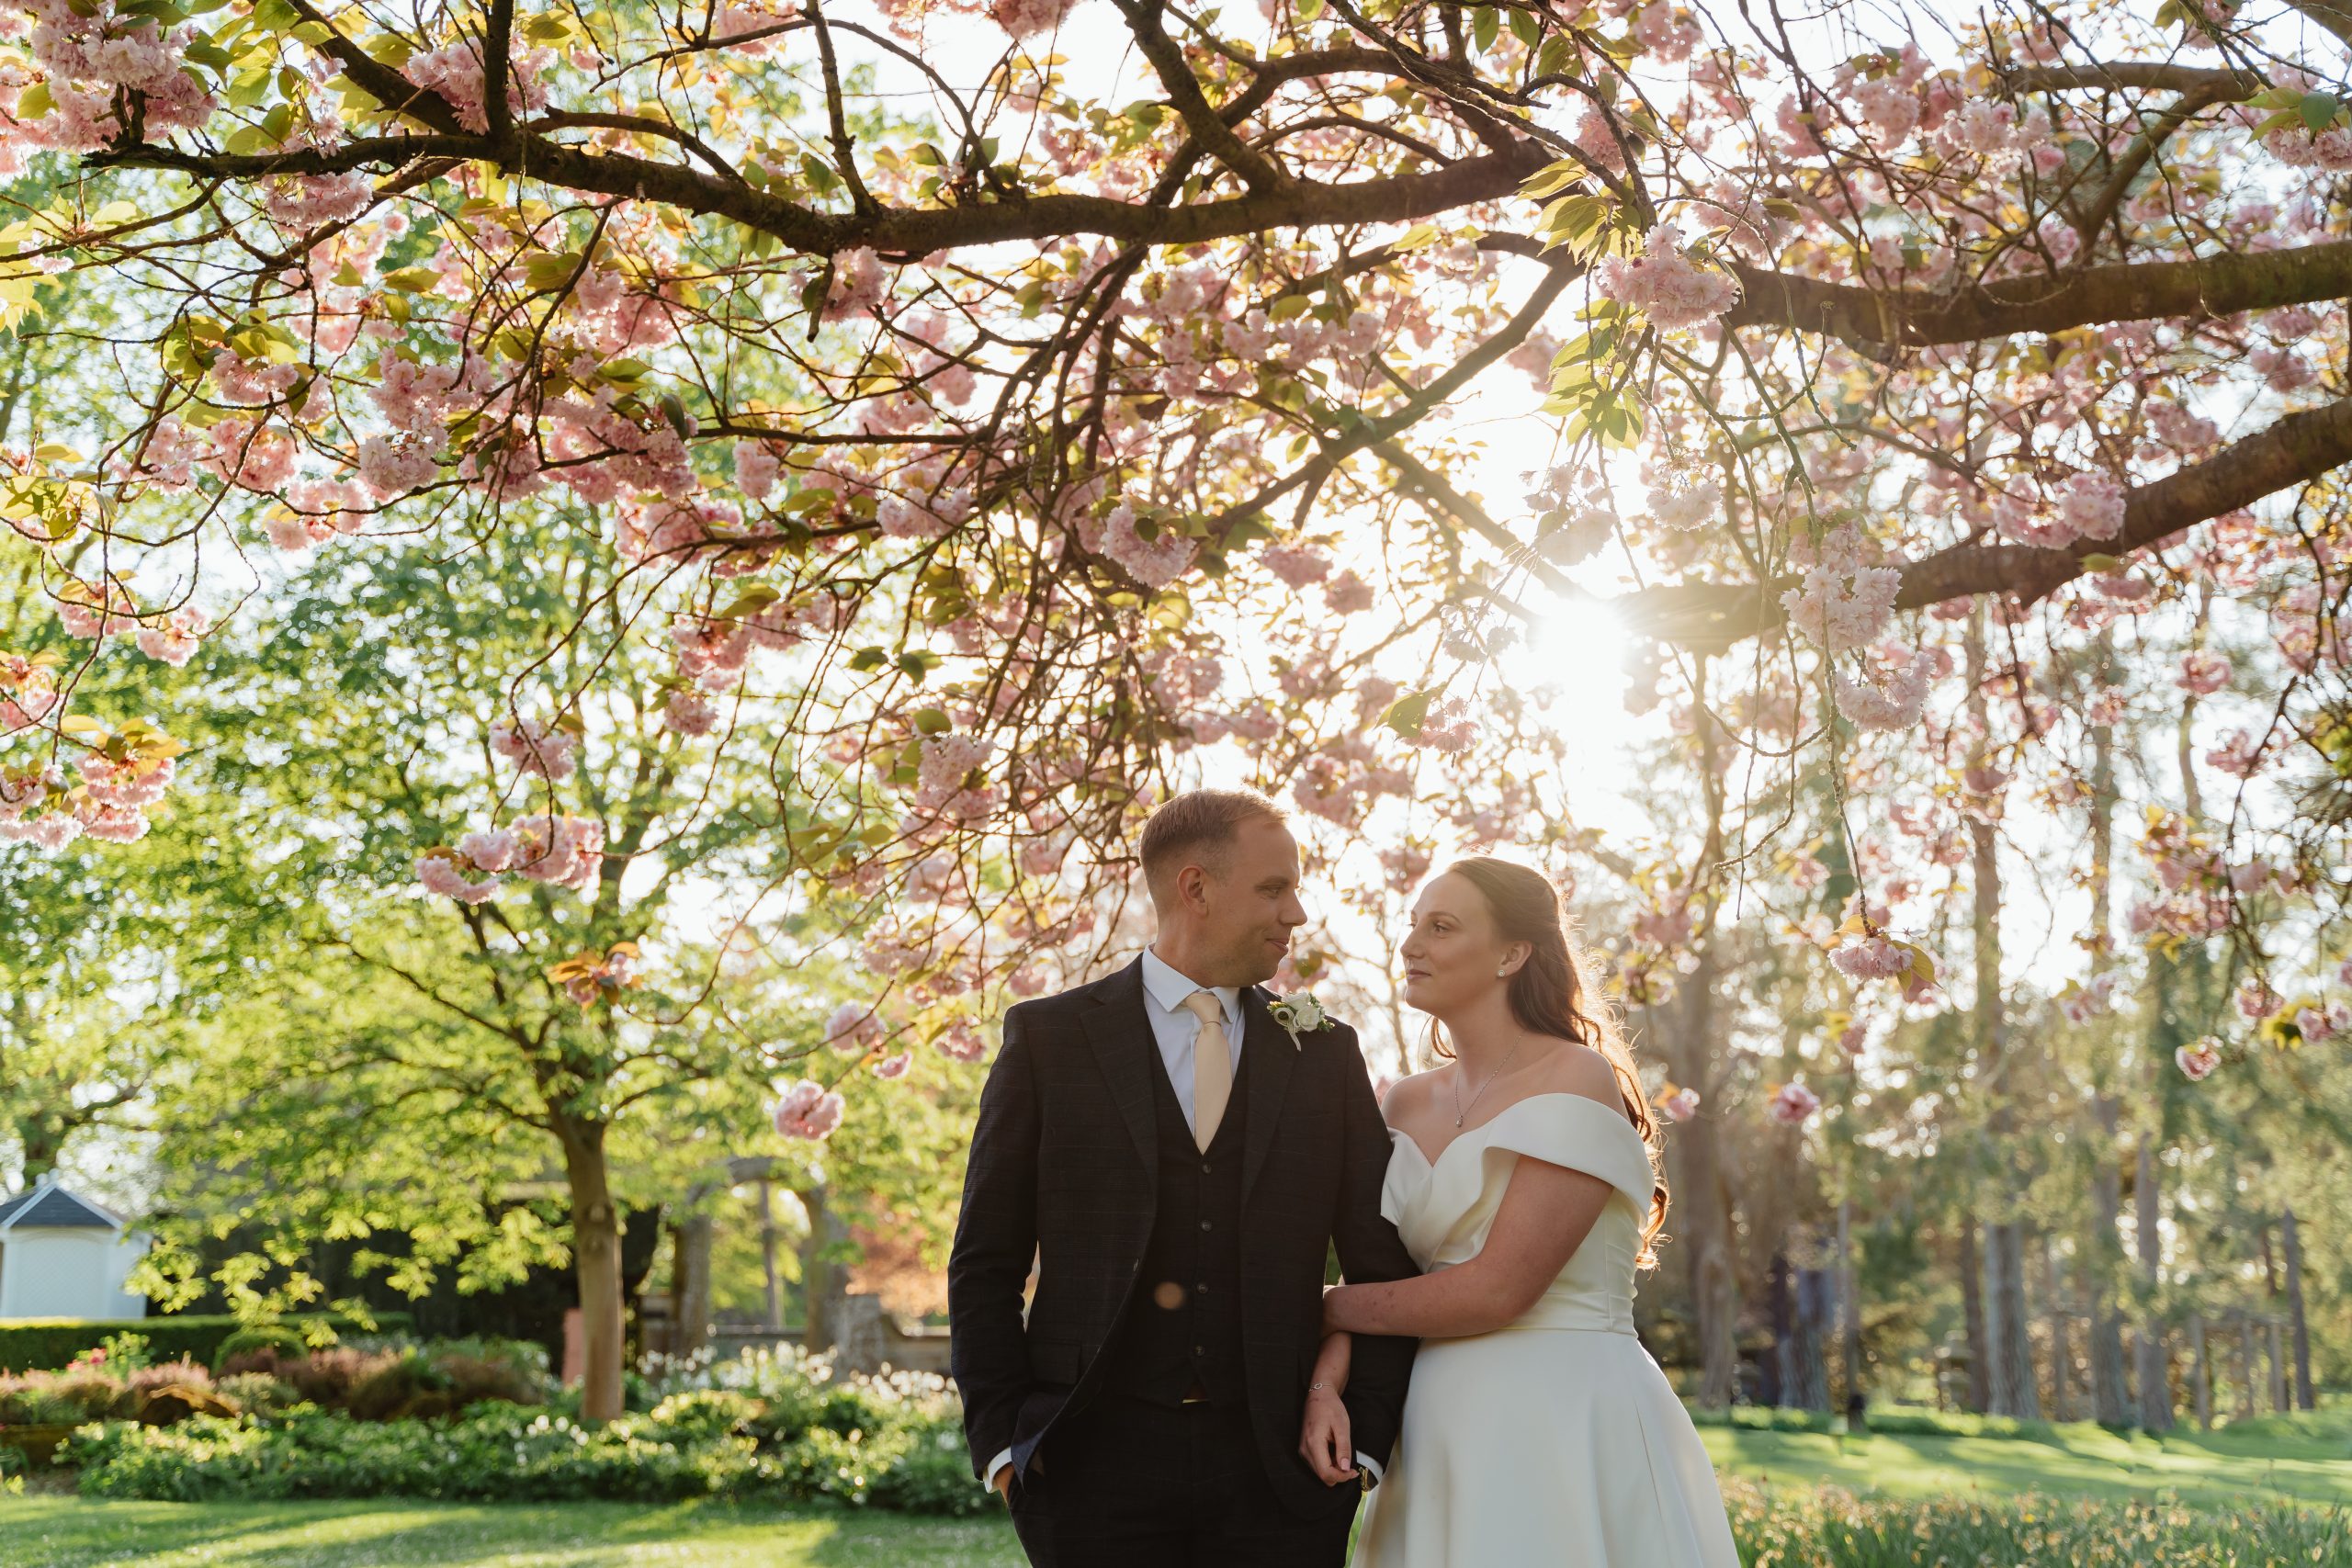 A couple snuggled up under a blossom tree at Fanhams Hall in Golden Hour